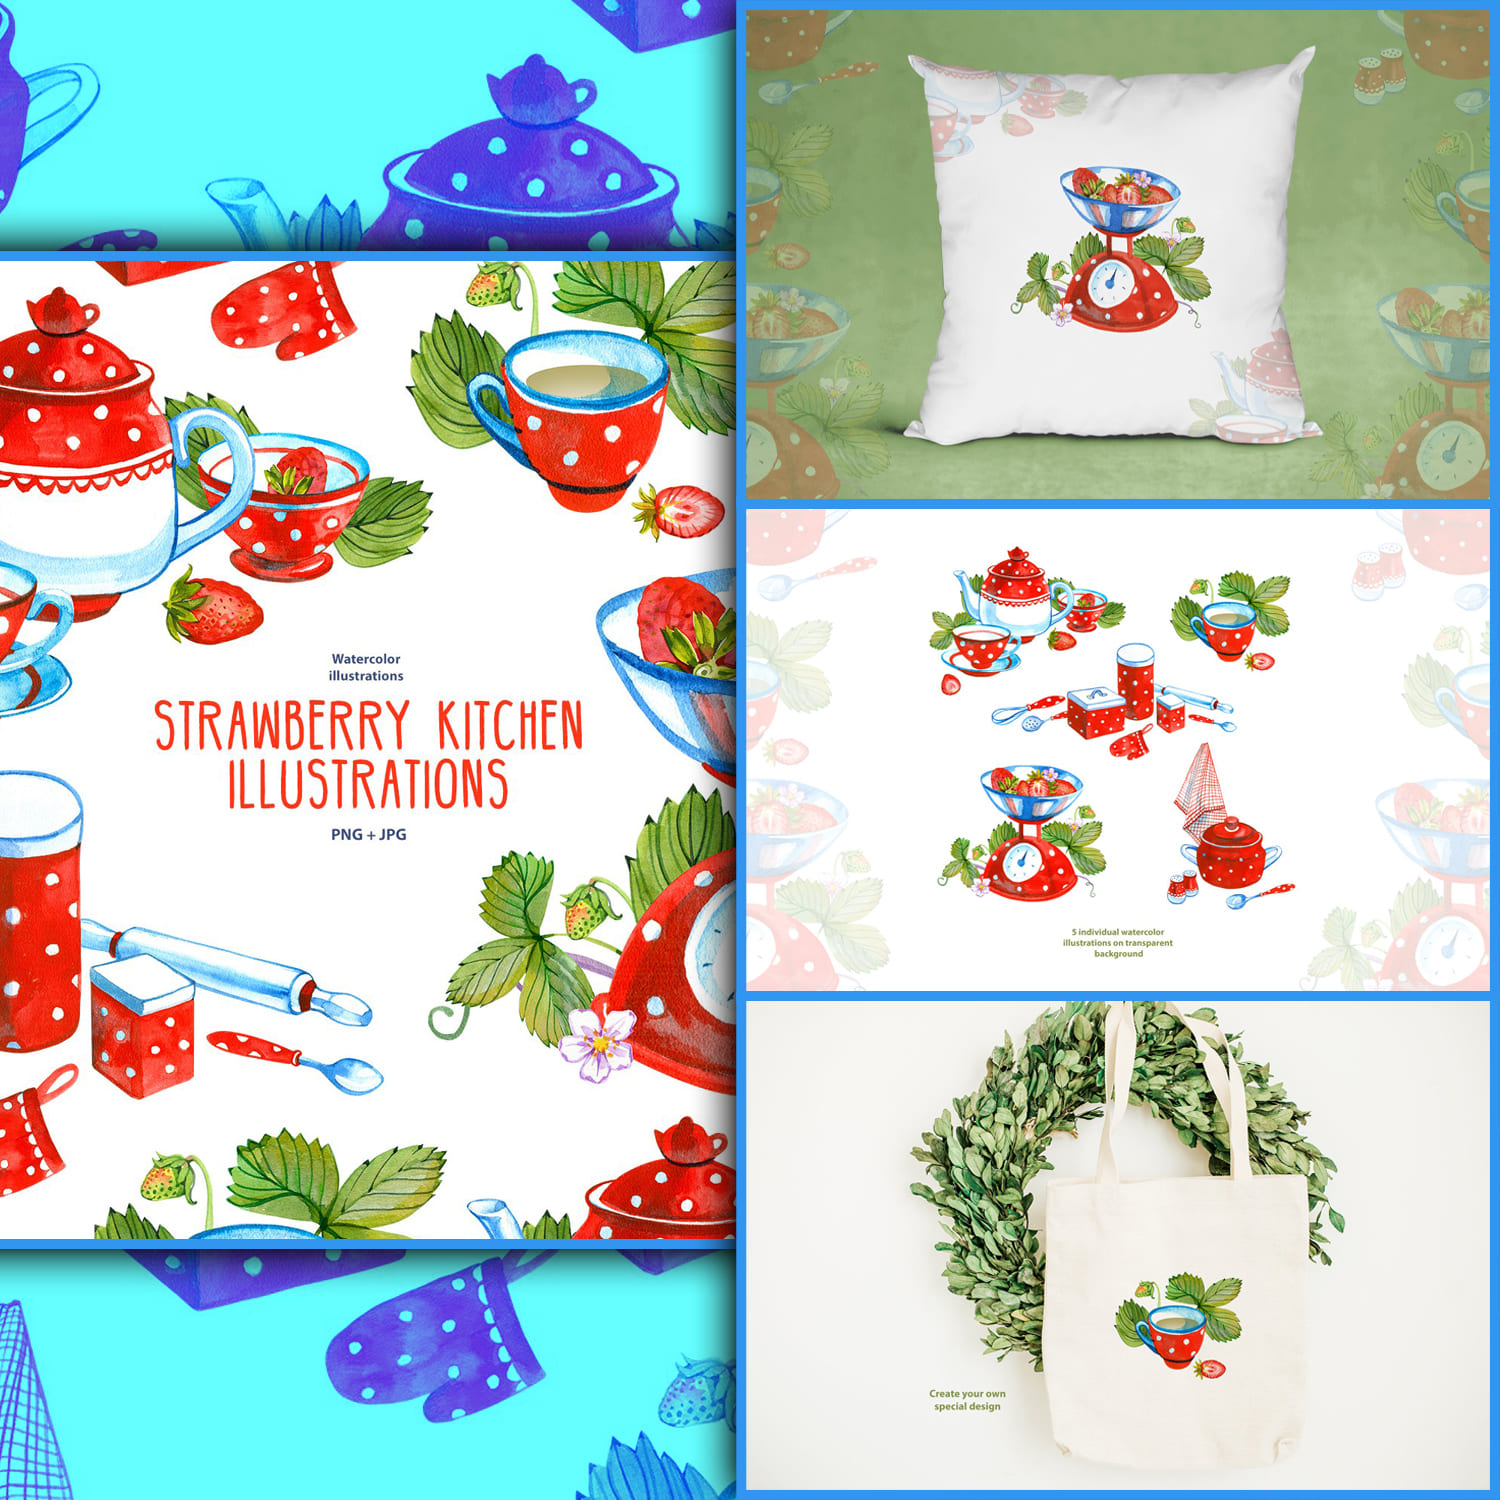 Examples of using strawberry kitchen illustrations on household items.